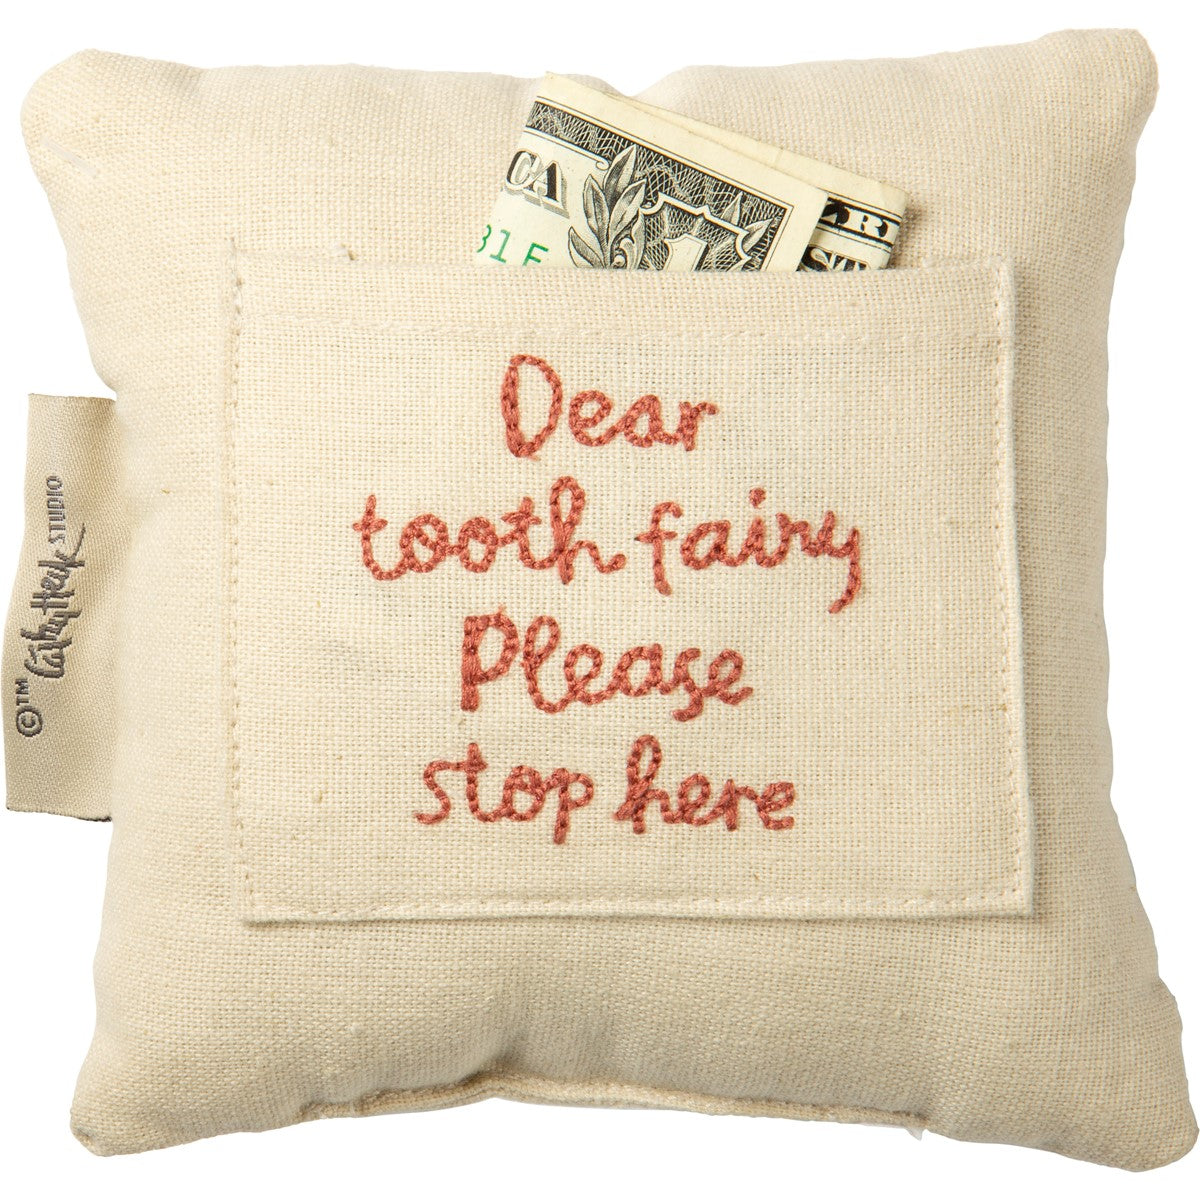 Tooth Fairy Pink Pillow With Pocket